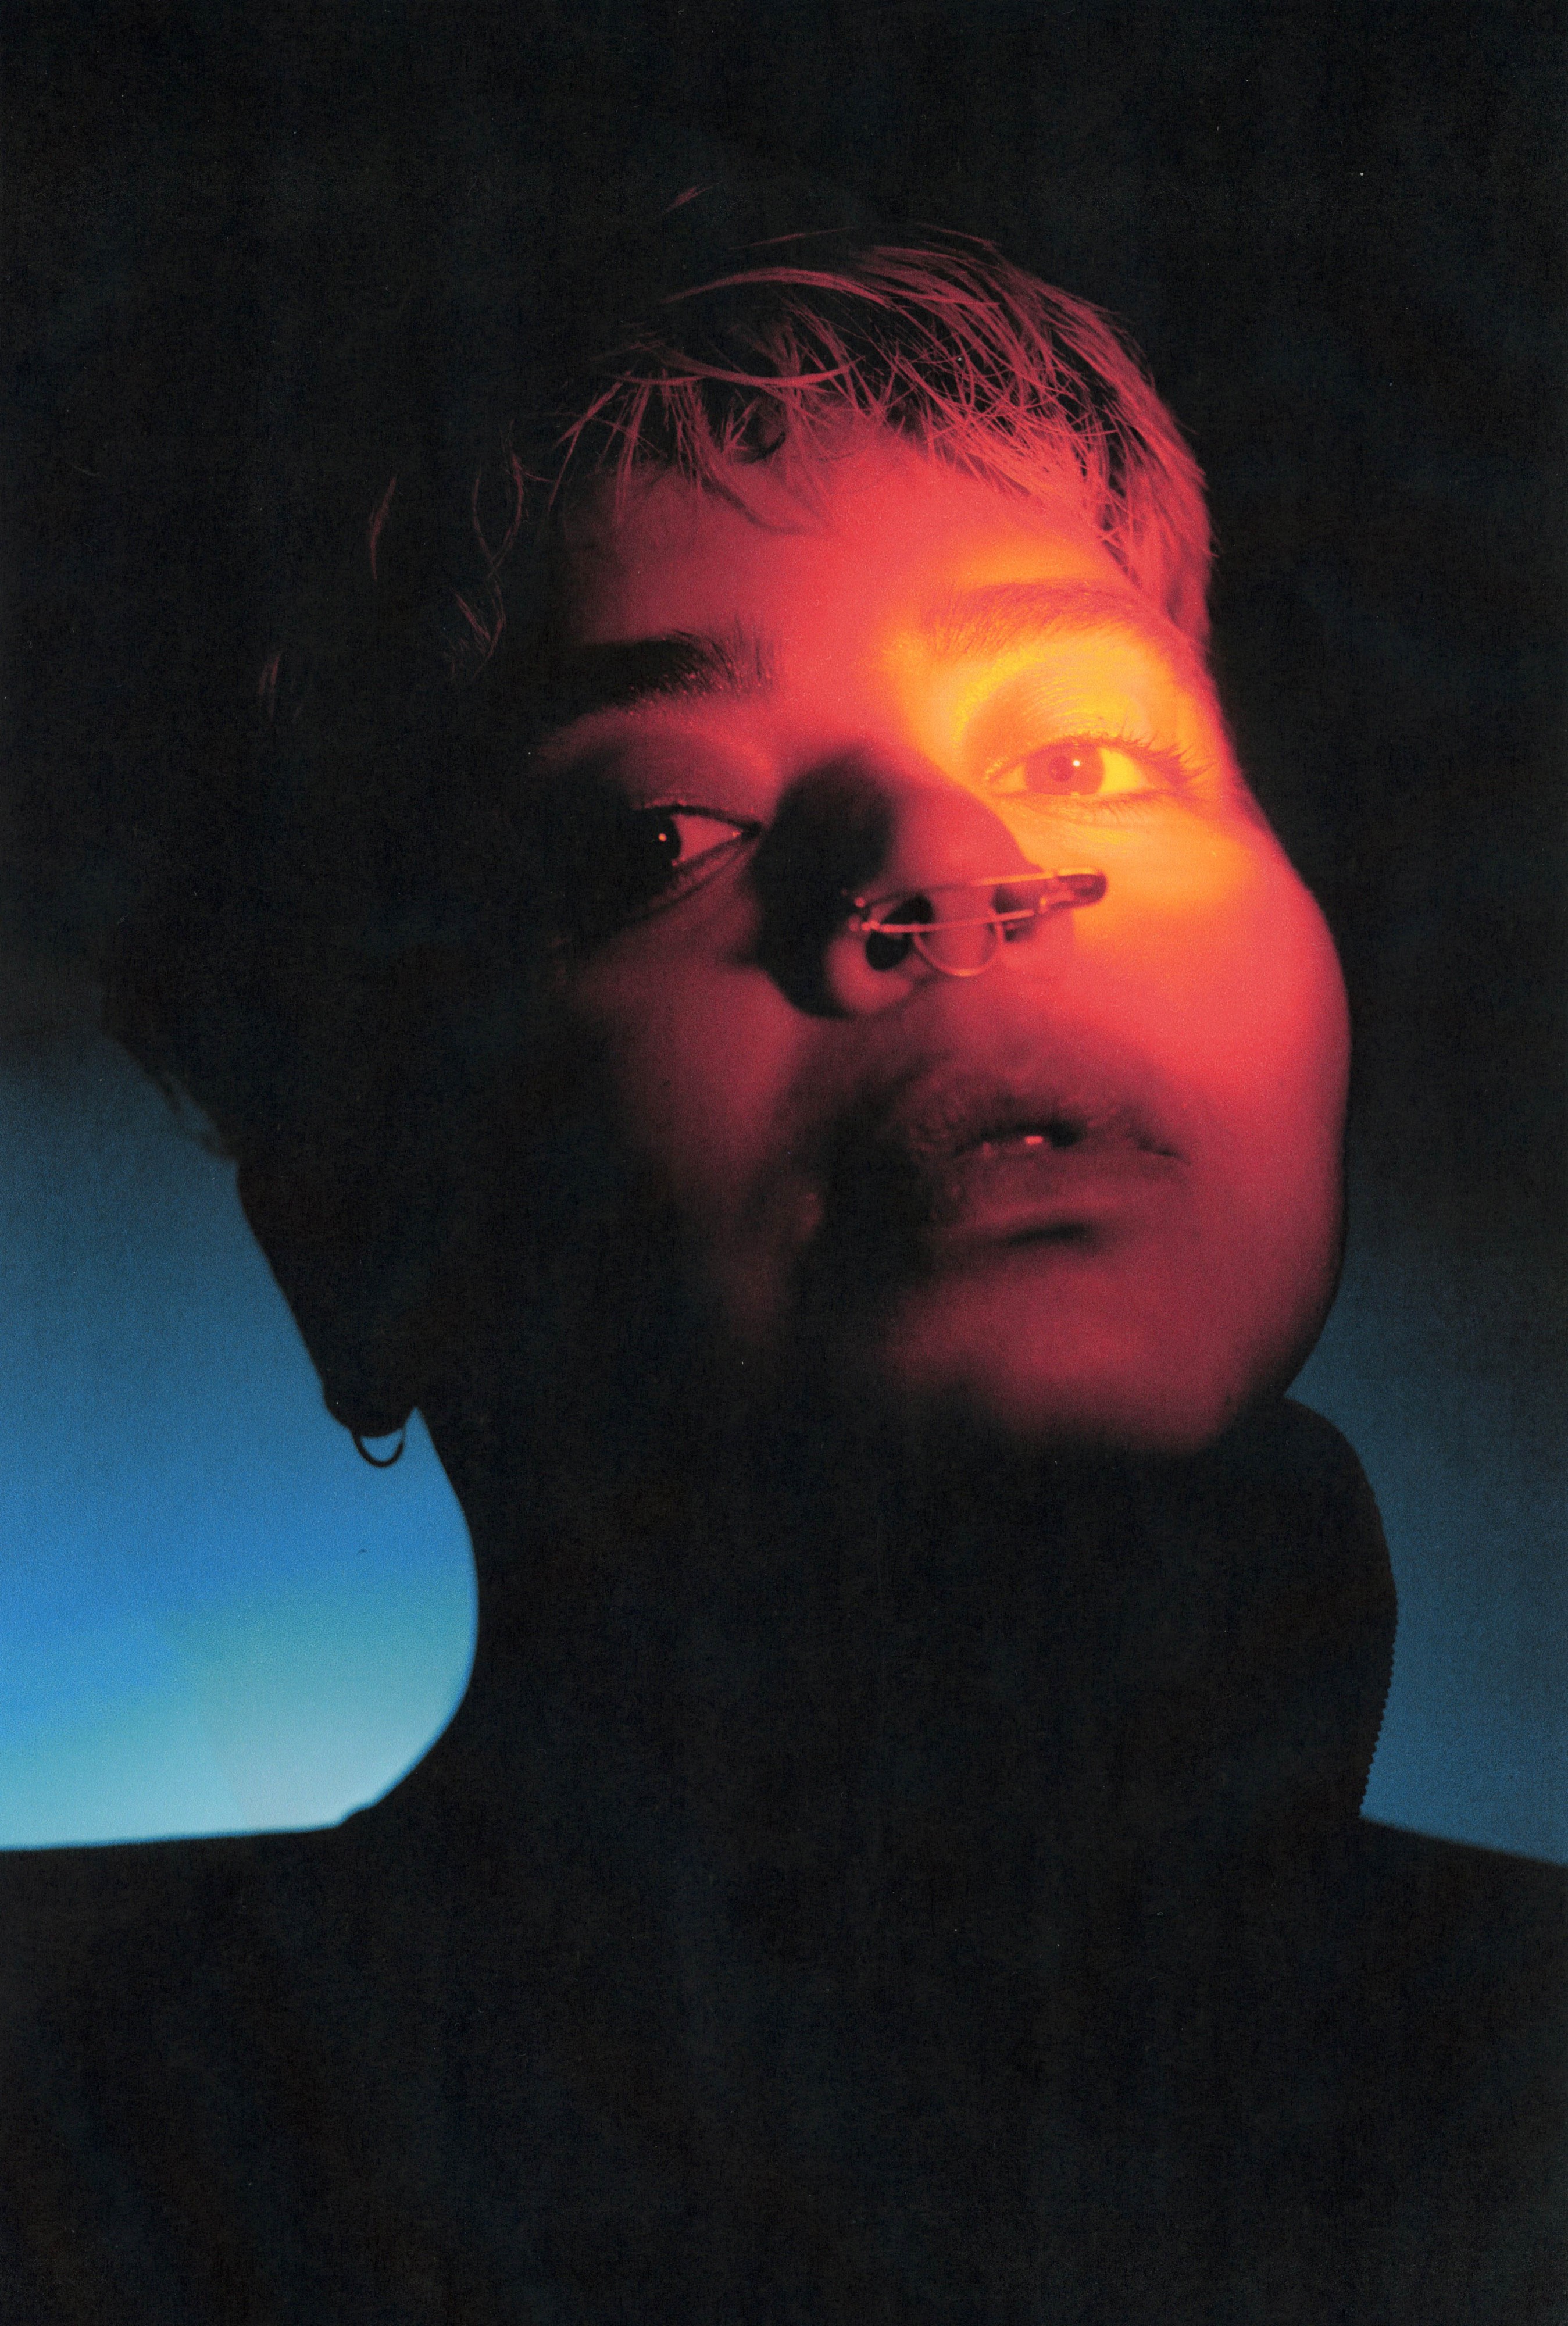 stefa marin alarcon gazes toward the camera with intent softness as a pool of warm orange and red light illuminates their left eye and dissipates across their face. Their nose pierced with a safety pin and a septum ring while the shadow of their ear discloses a small round earring. They are lit from behind with a small blue light deep in the image’s background, most of their head and collar left in dark silhouette.